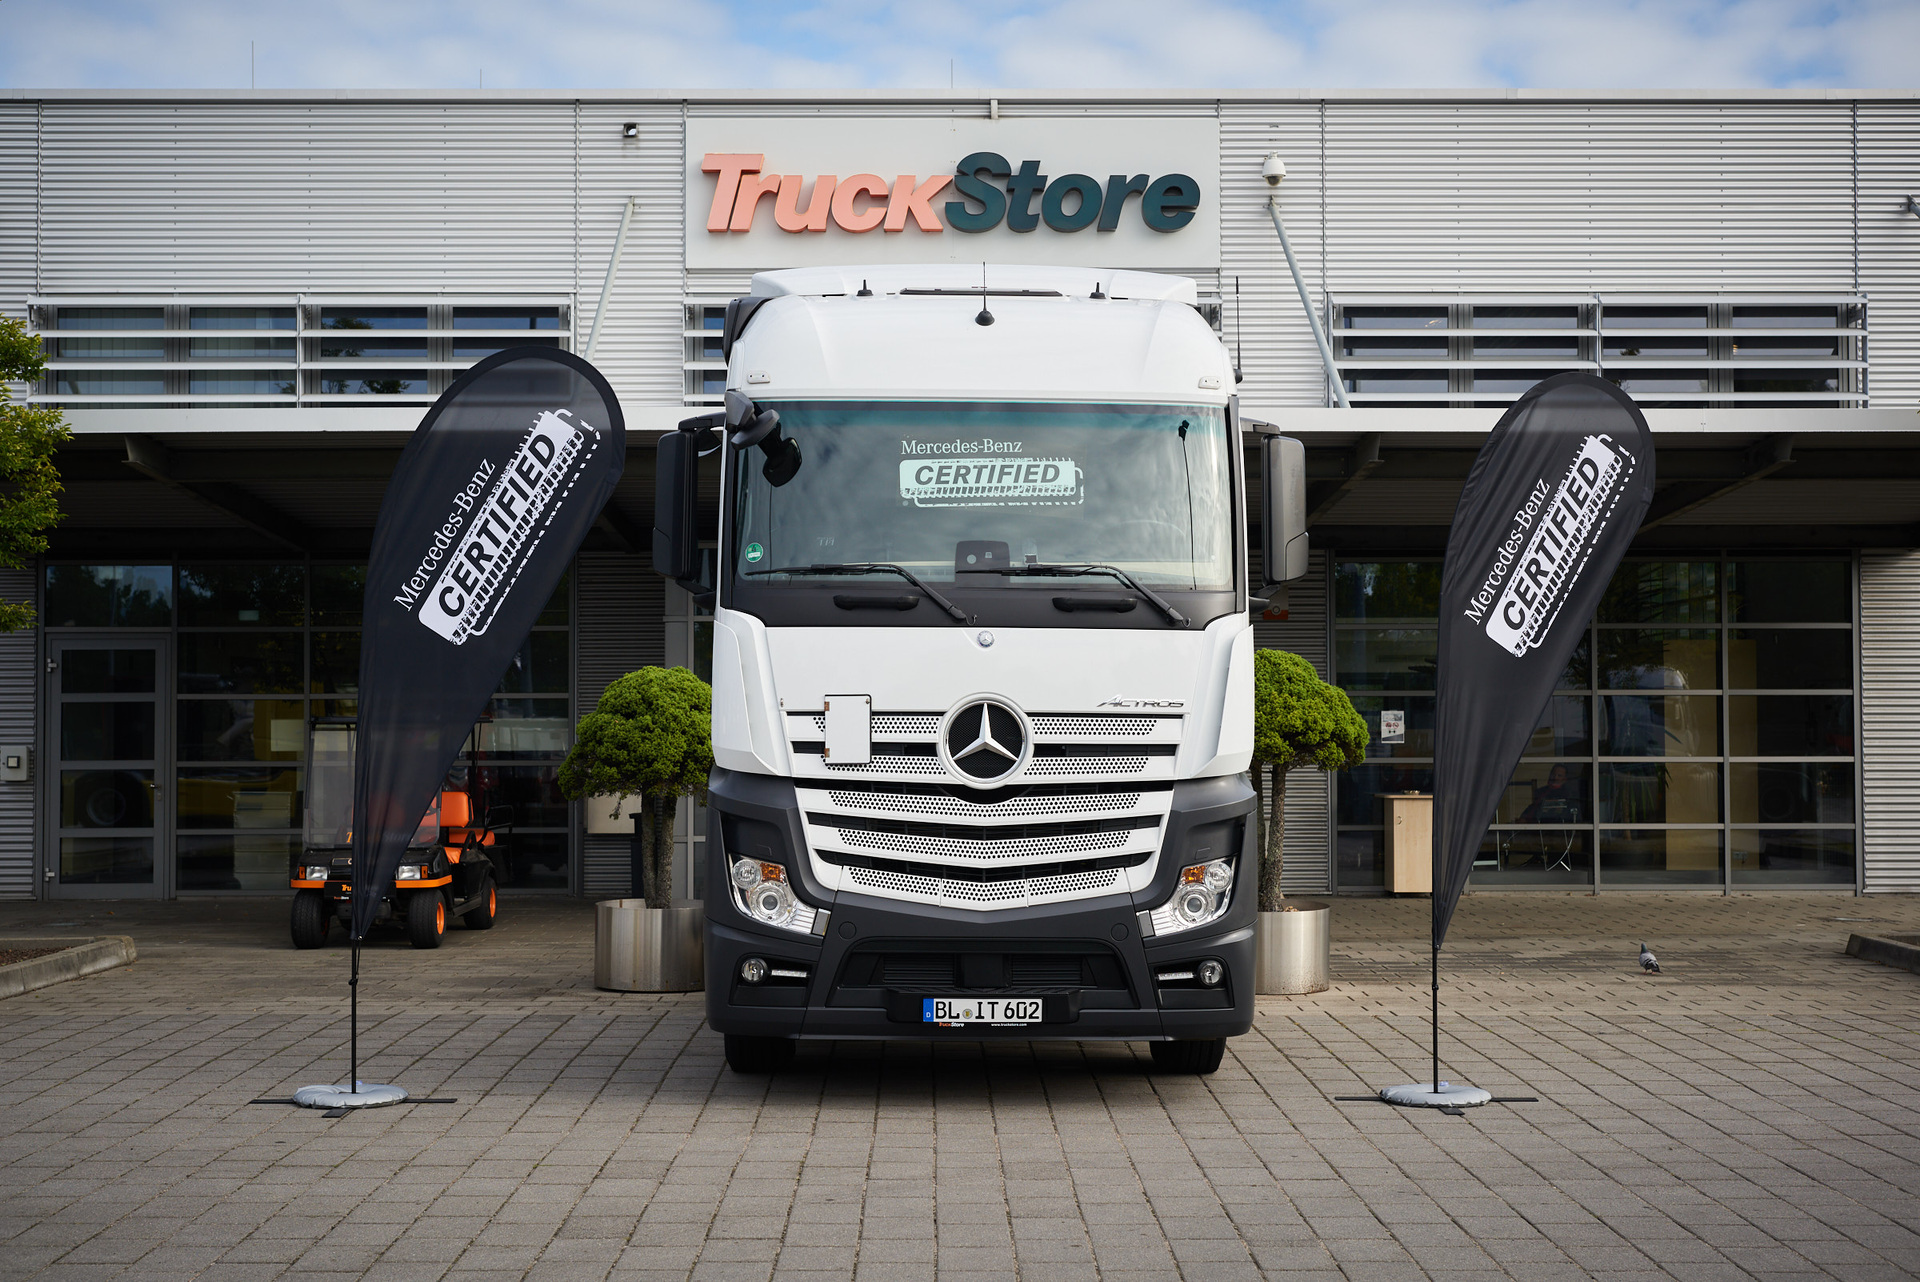 New label for used trucks with a quality commitment: "Mercedes-Benz Certified" now available in Germany